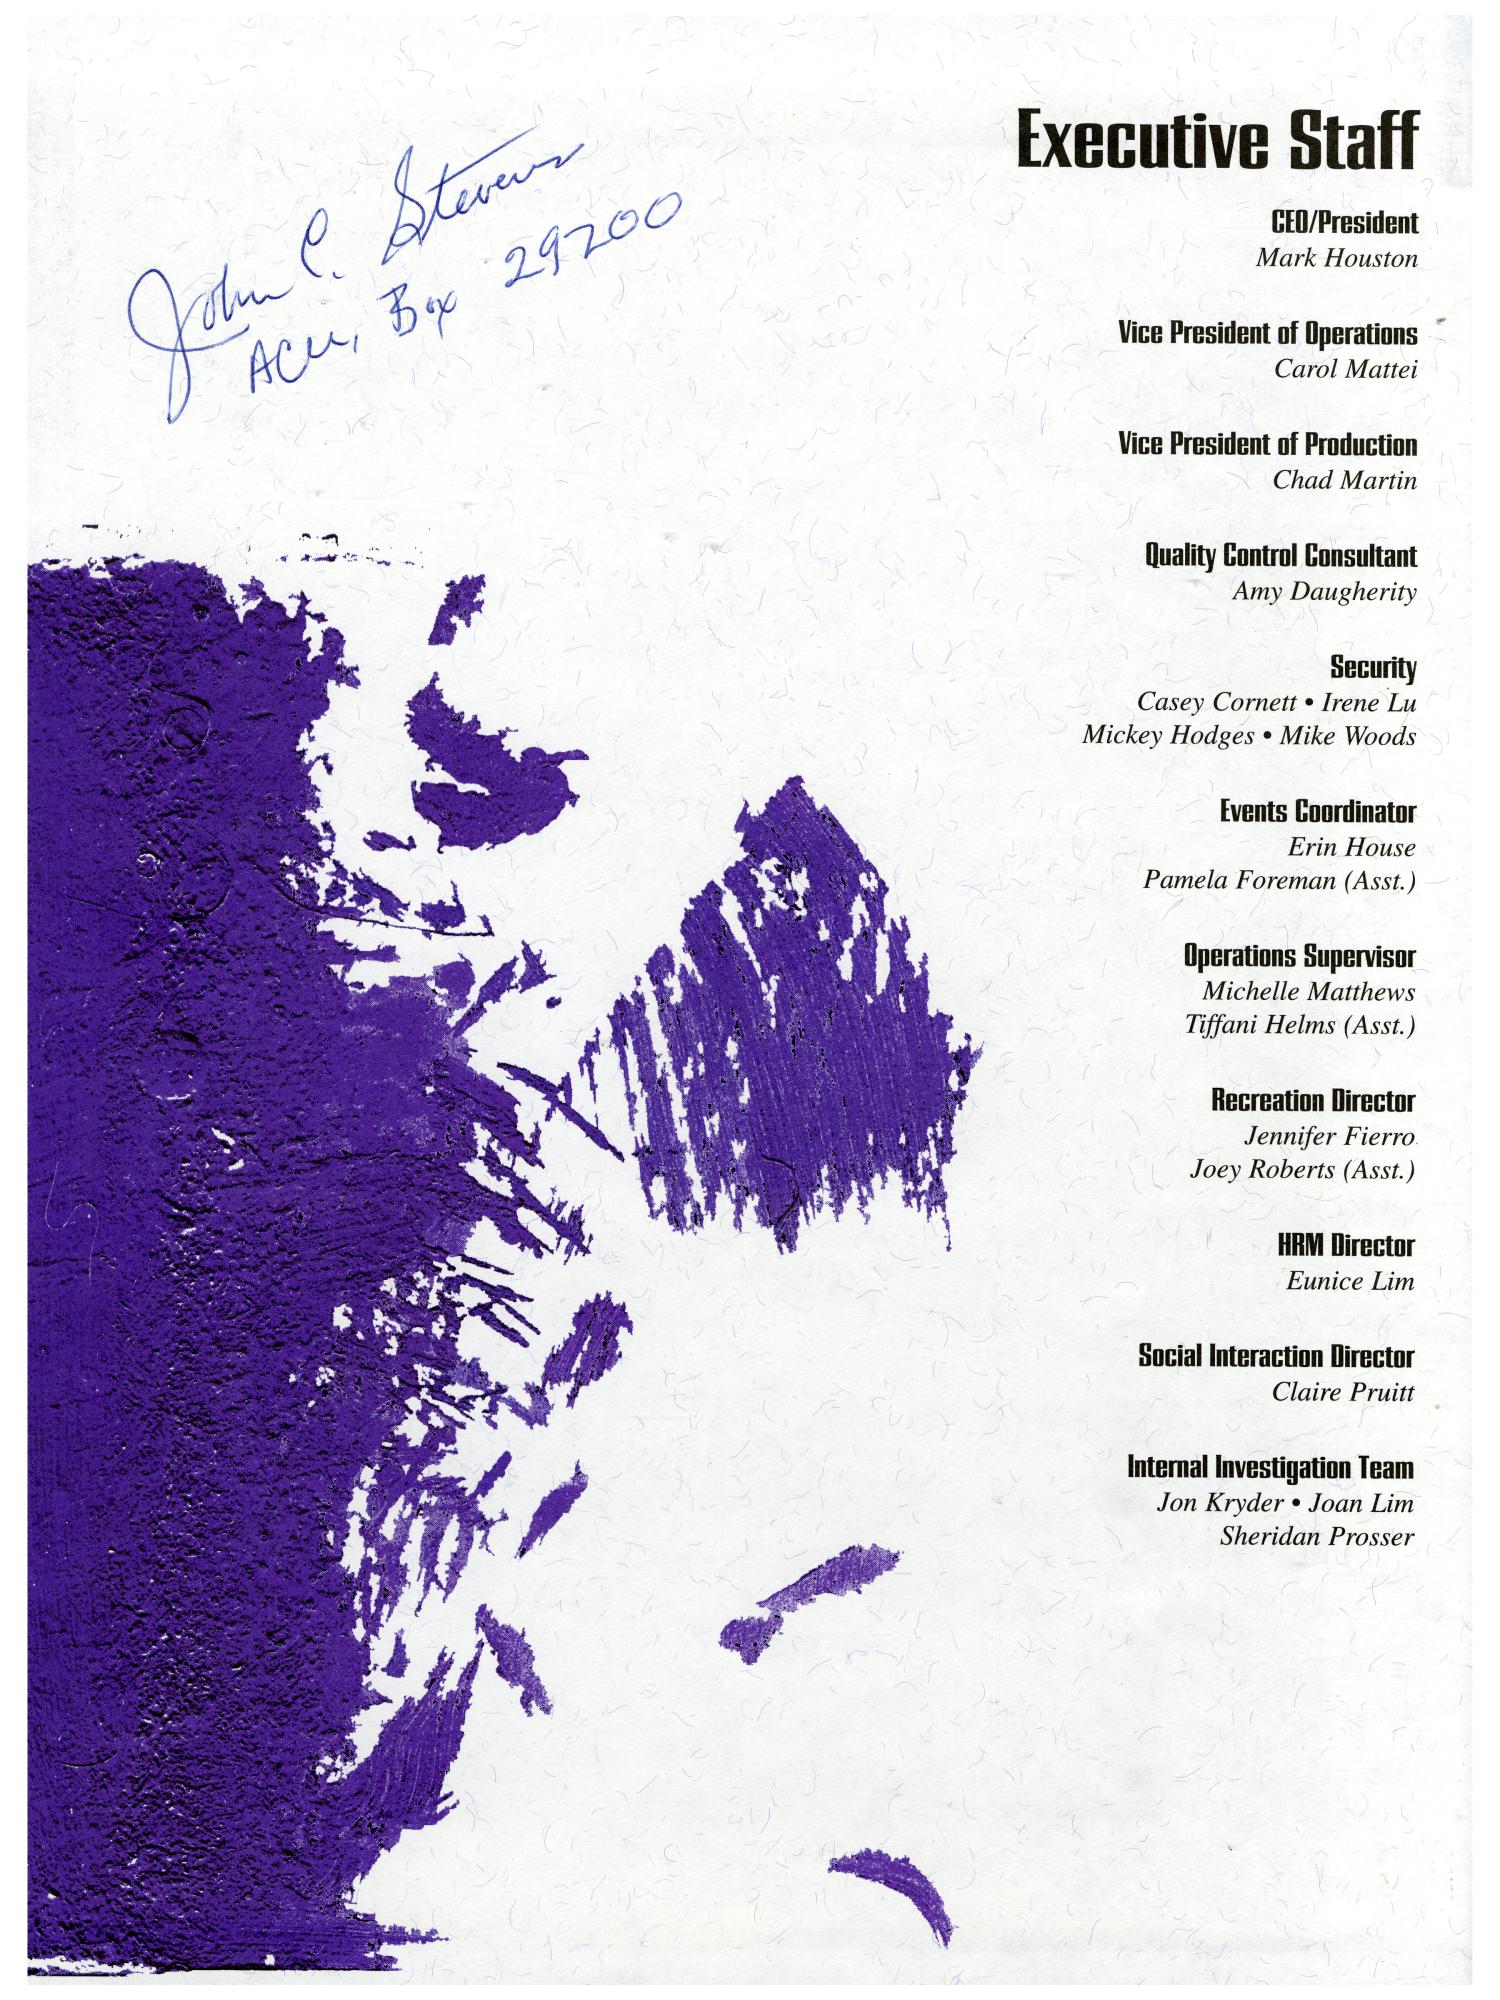 Prickly Pear, Yearbook of Abilene Christian University, 1997
                                                
                                                    Front Inside
                                                